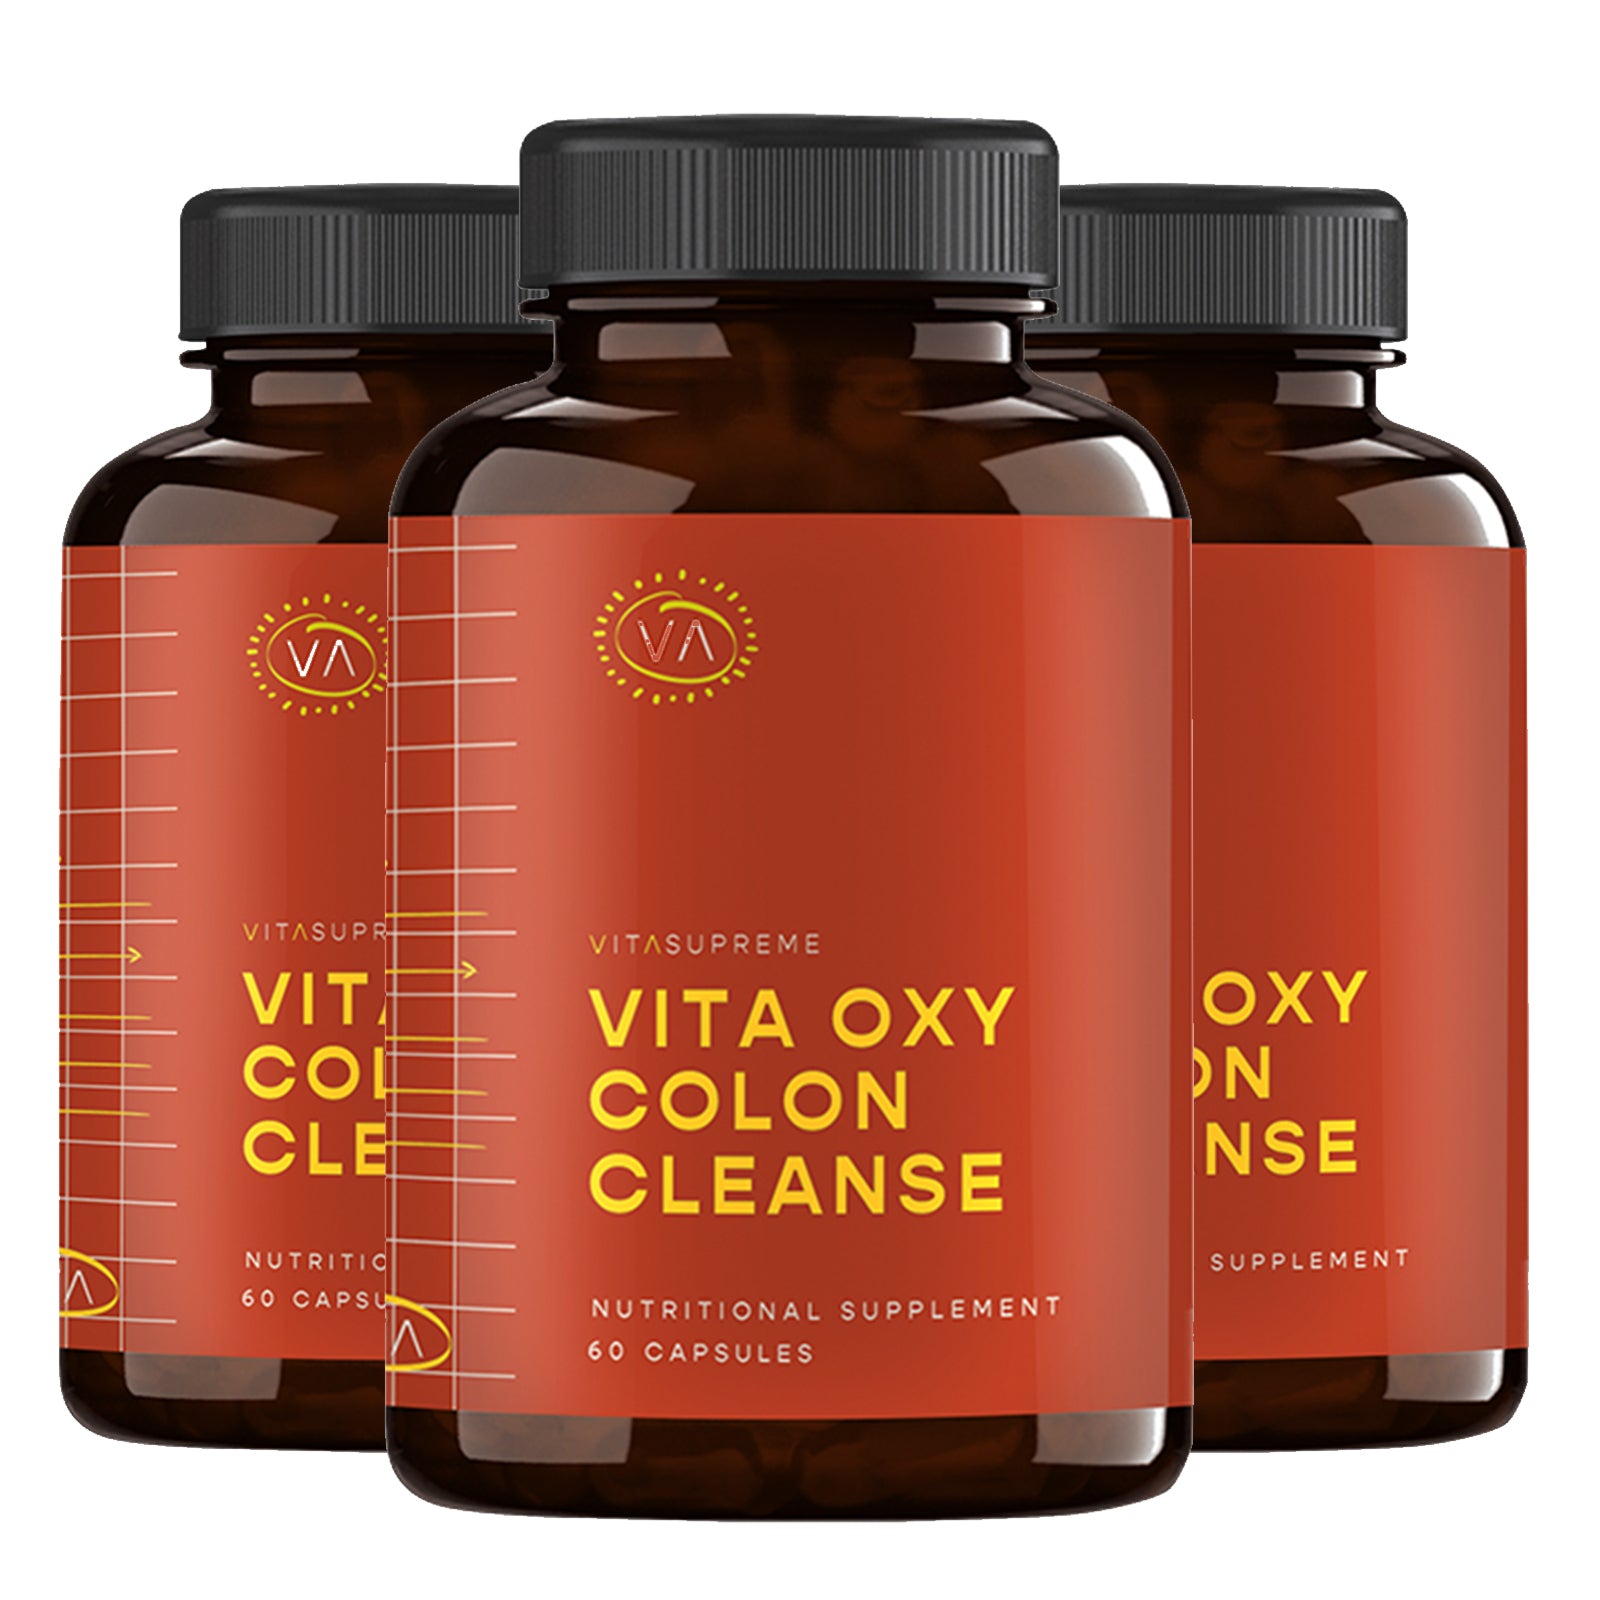 Vita Oxy Colon Cleanse™ - 3 Months Supply